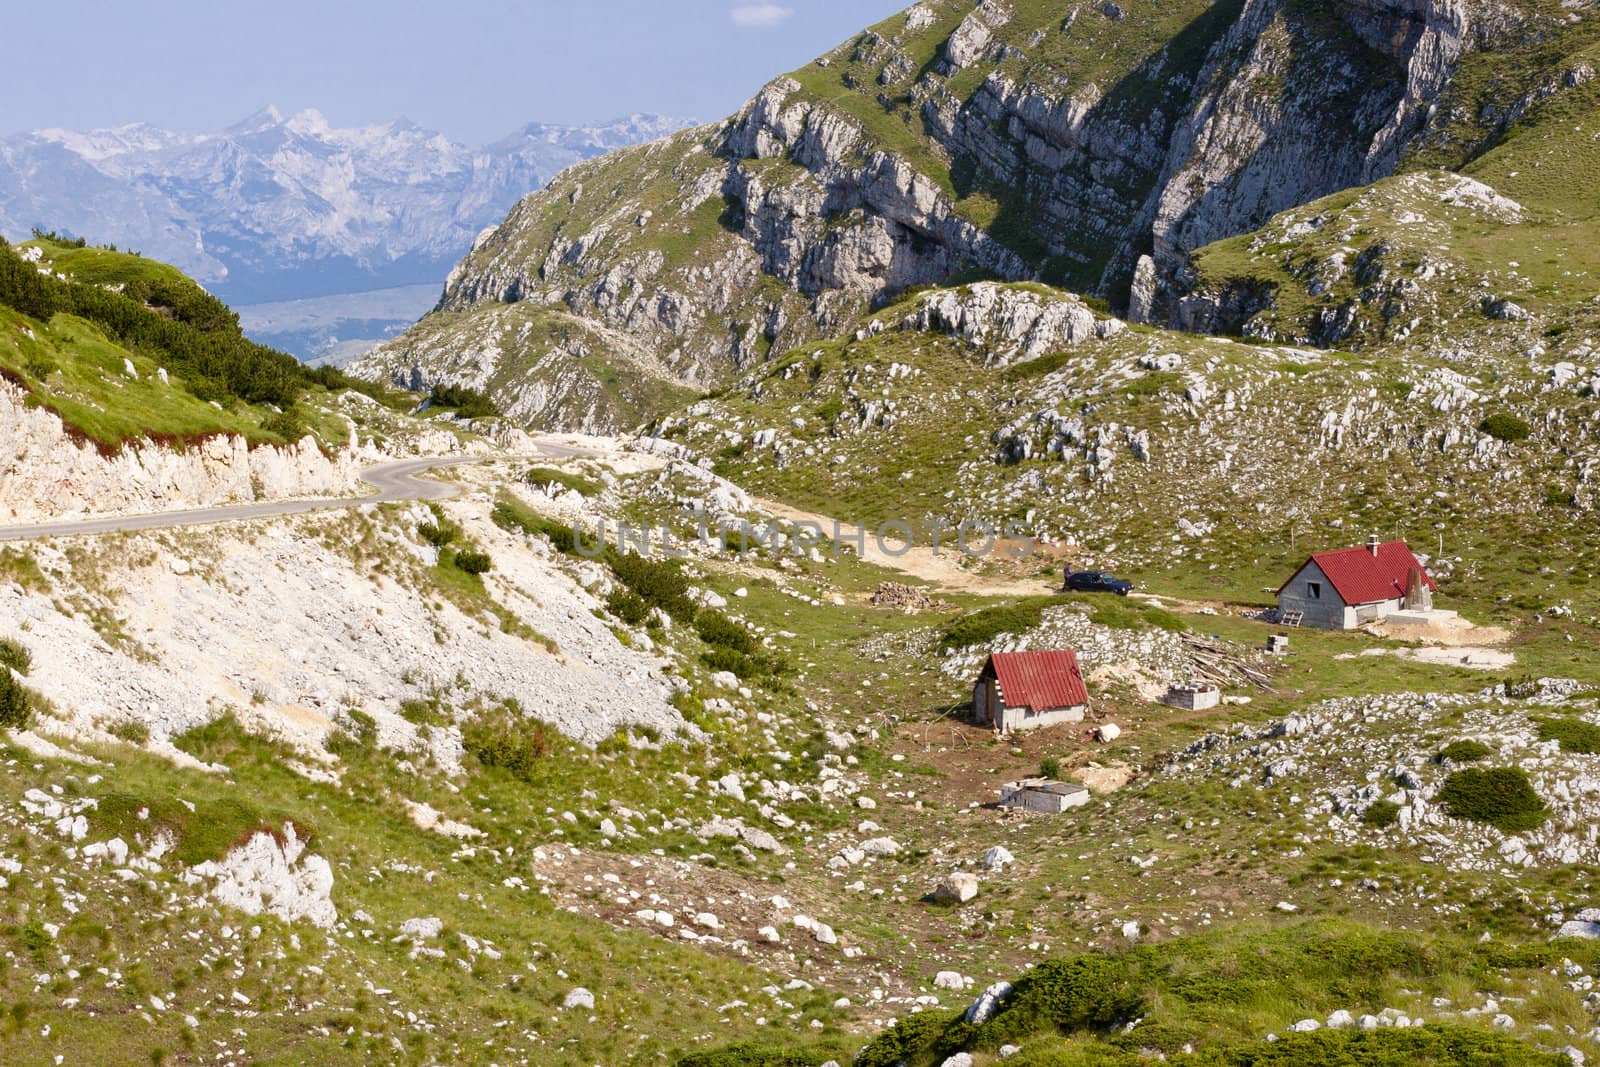 Two cottage with red roofs in Durmitor national park - Montenegro.